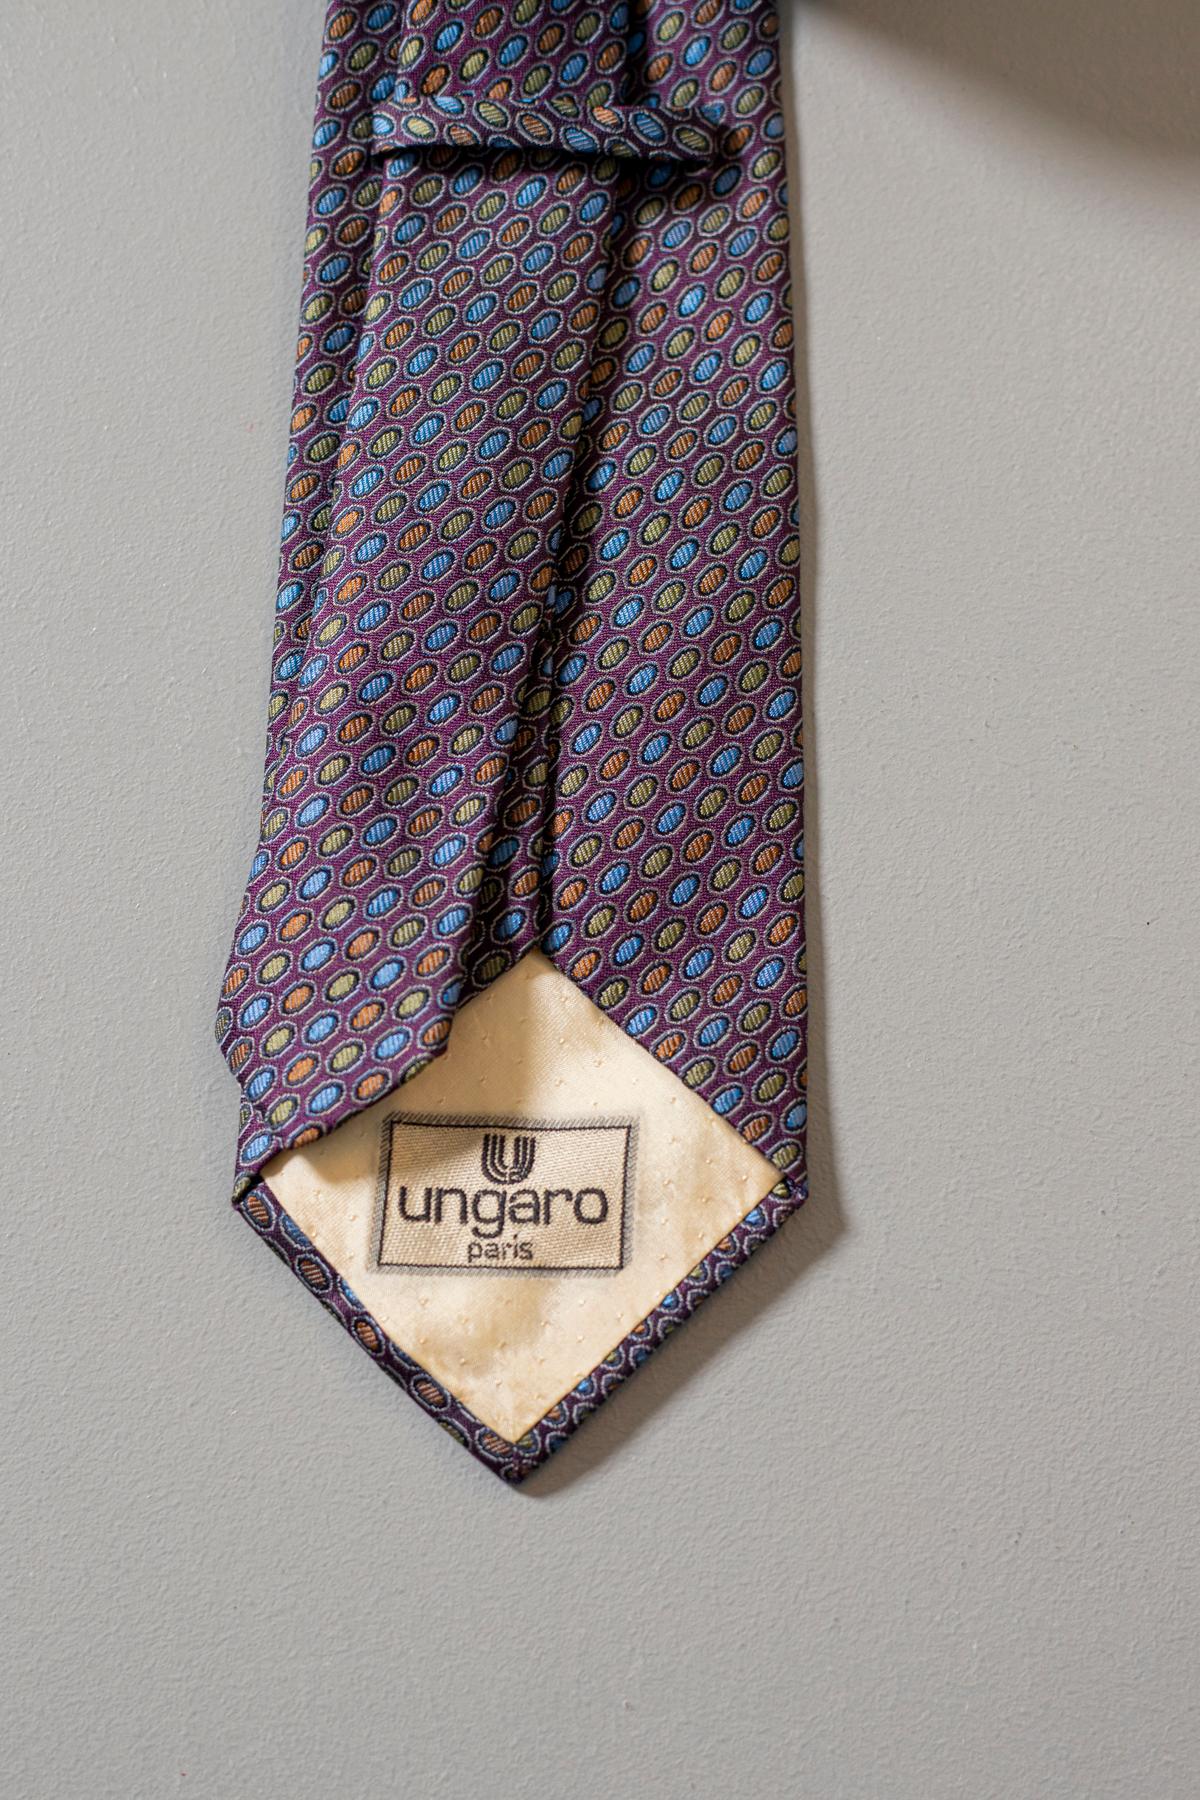 Elegant tie in silk designed by the stylist Ungaro Paris.
This vintage tie is colorful, yet classic. Decorated with small orange, green and blue circles, it gives a touch of style to your outfit. It is a perfect tie for an evening of work, or a